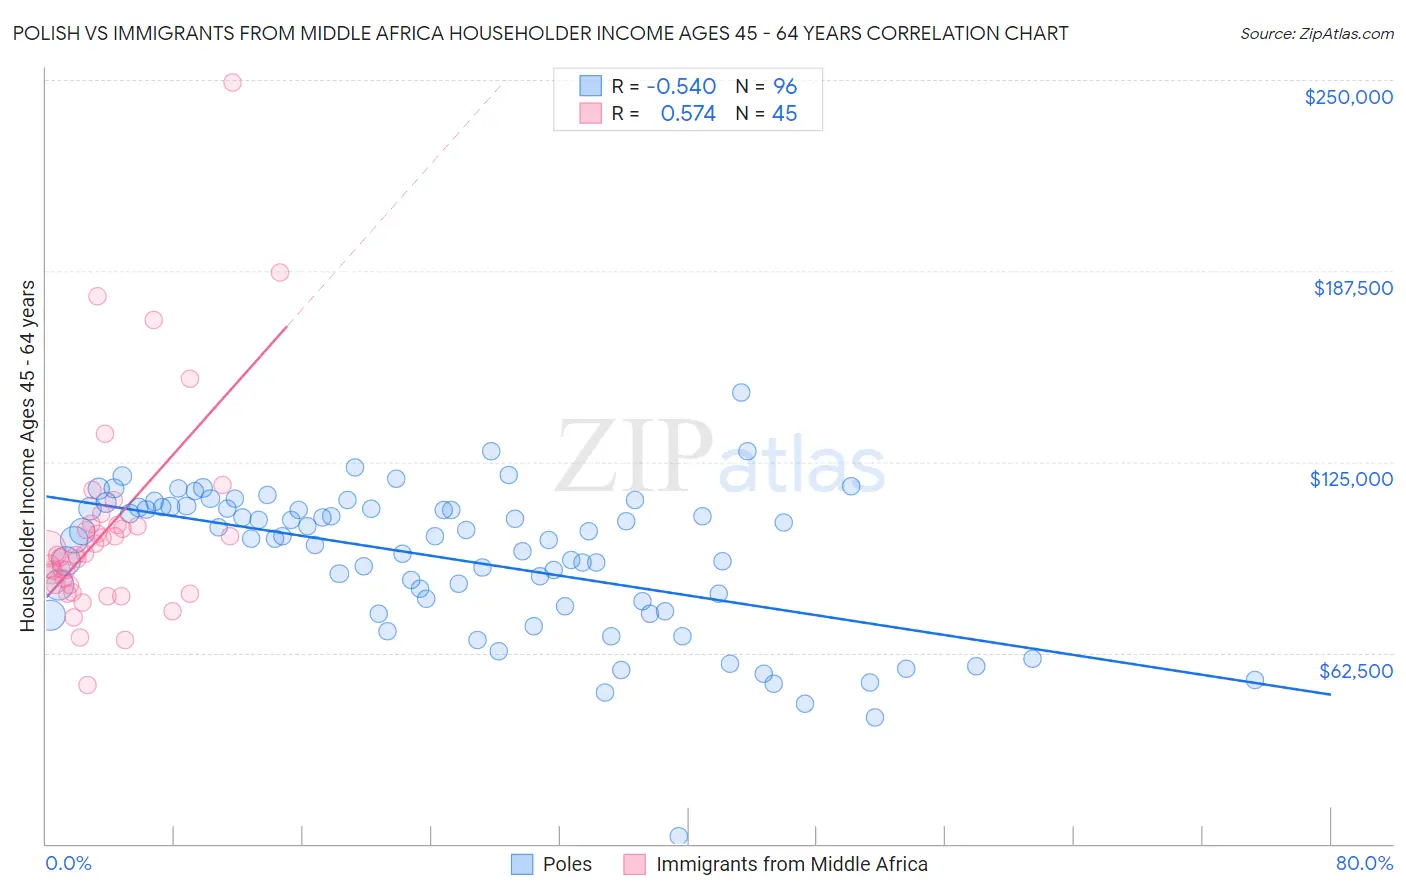 Polish vs Immigrants from Middle Africa Householder Income Ages 45 - 64 years